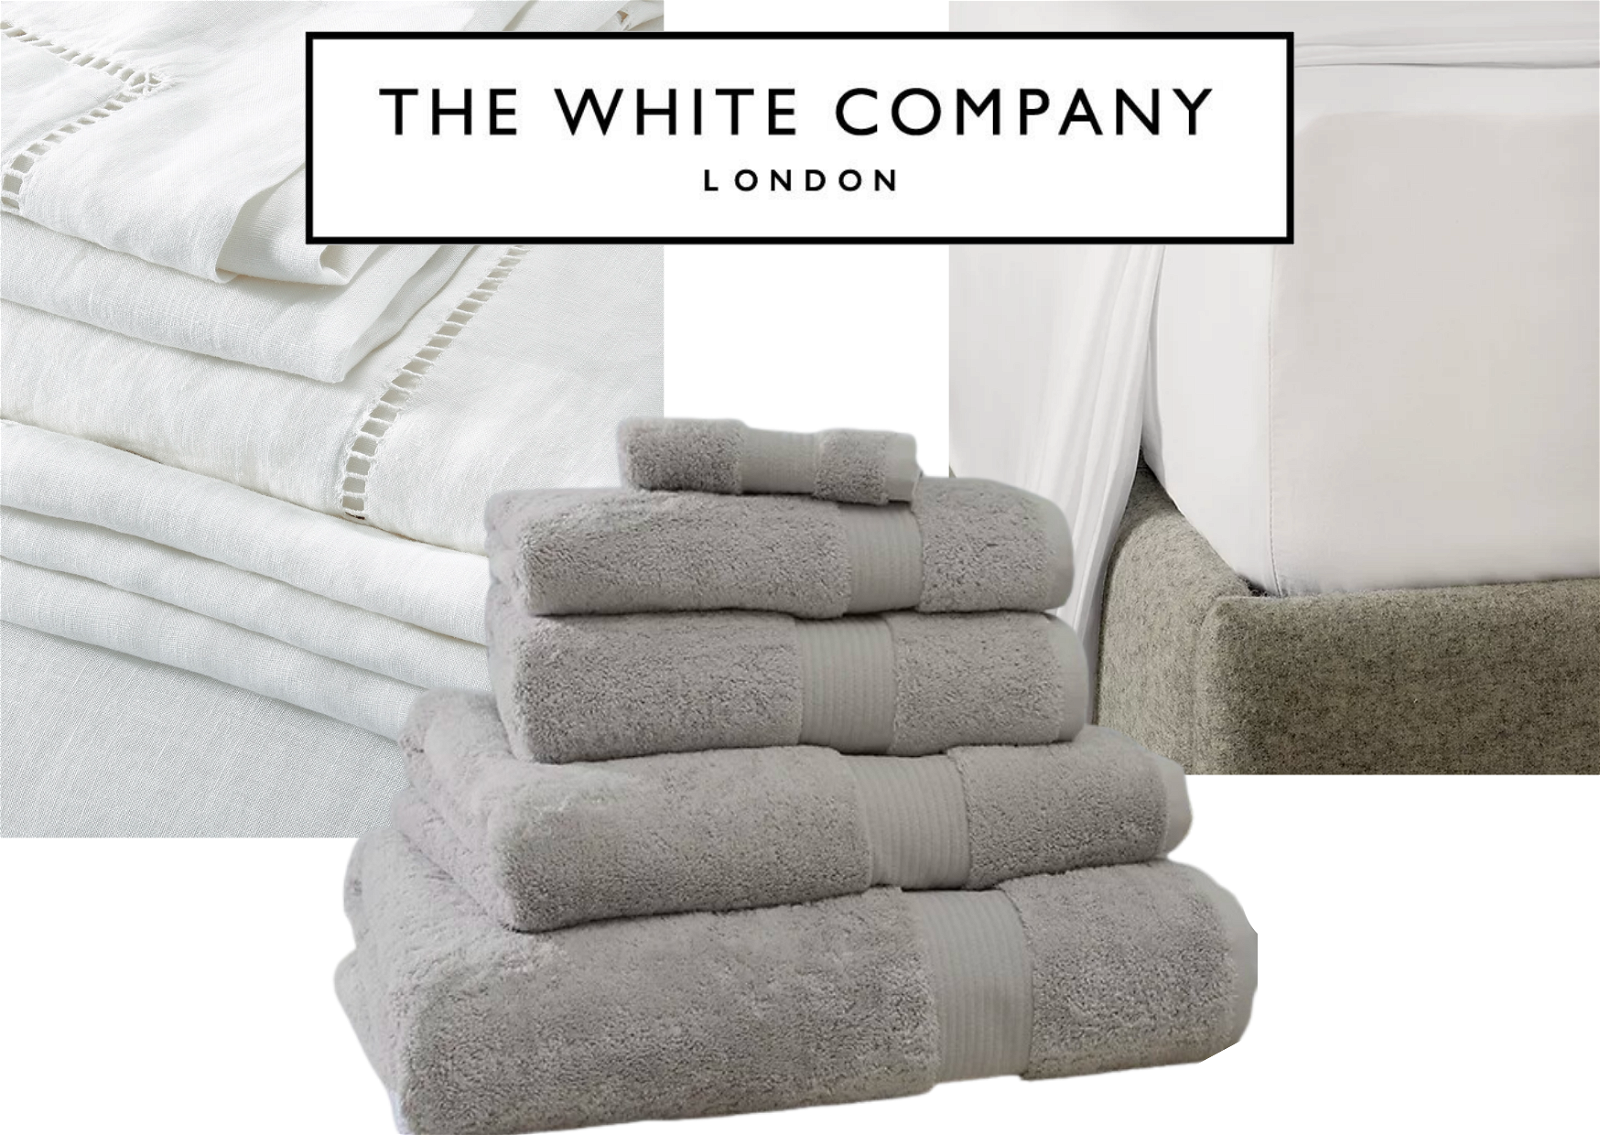 White Company Bedding And Towels 